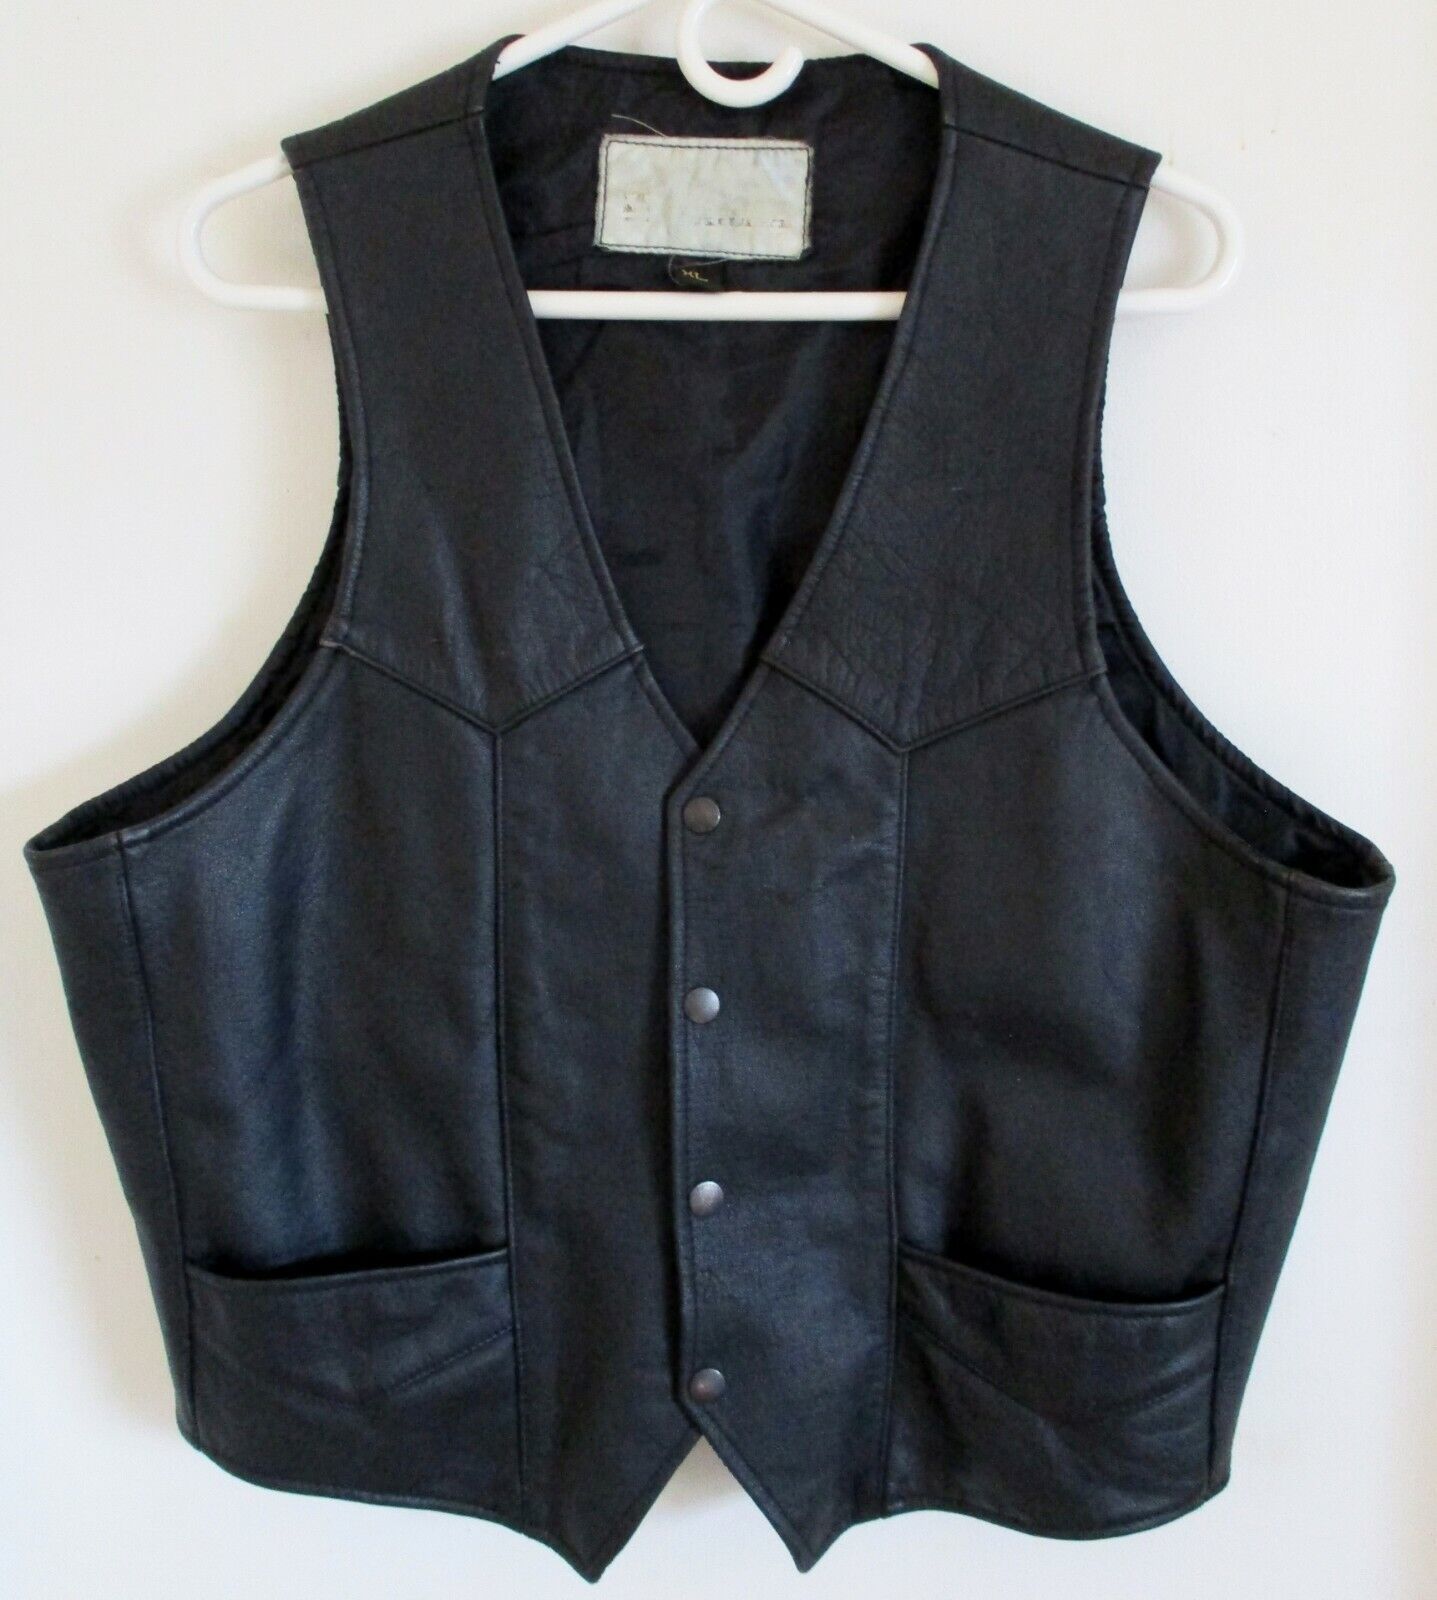 Primary image for Vintage Ayumi Black Leather Vest Size XL with Snap Closure 